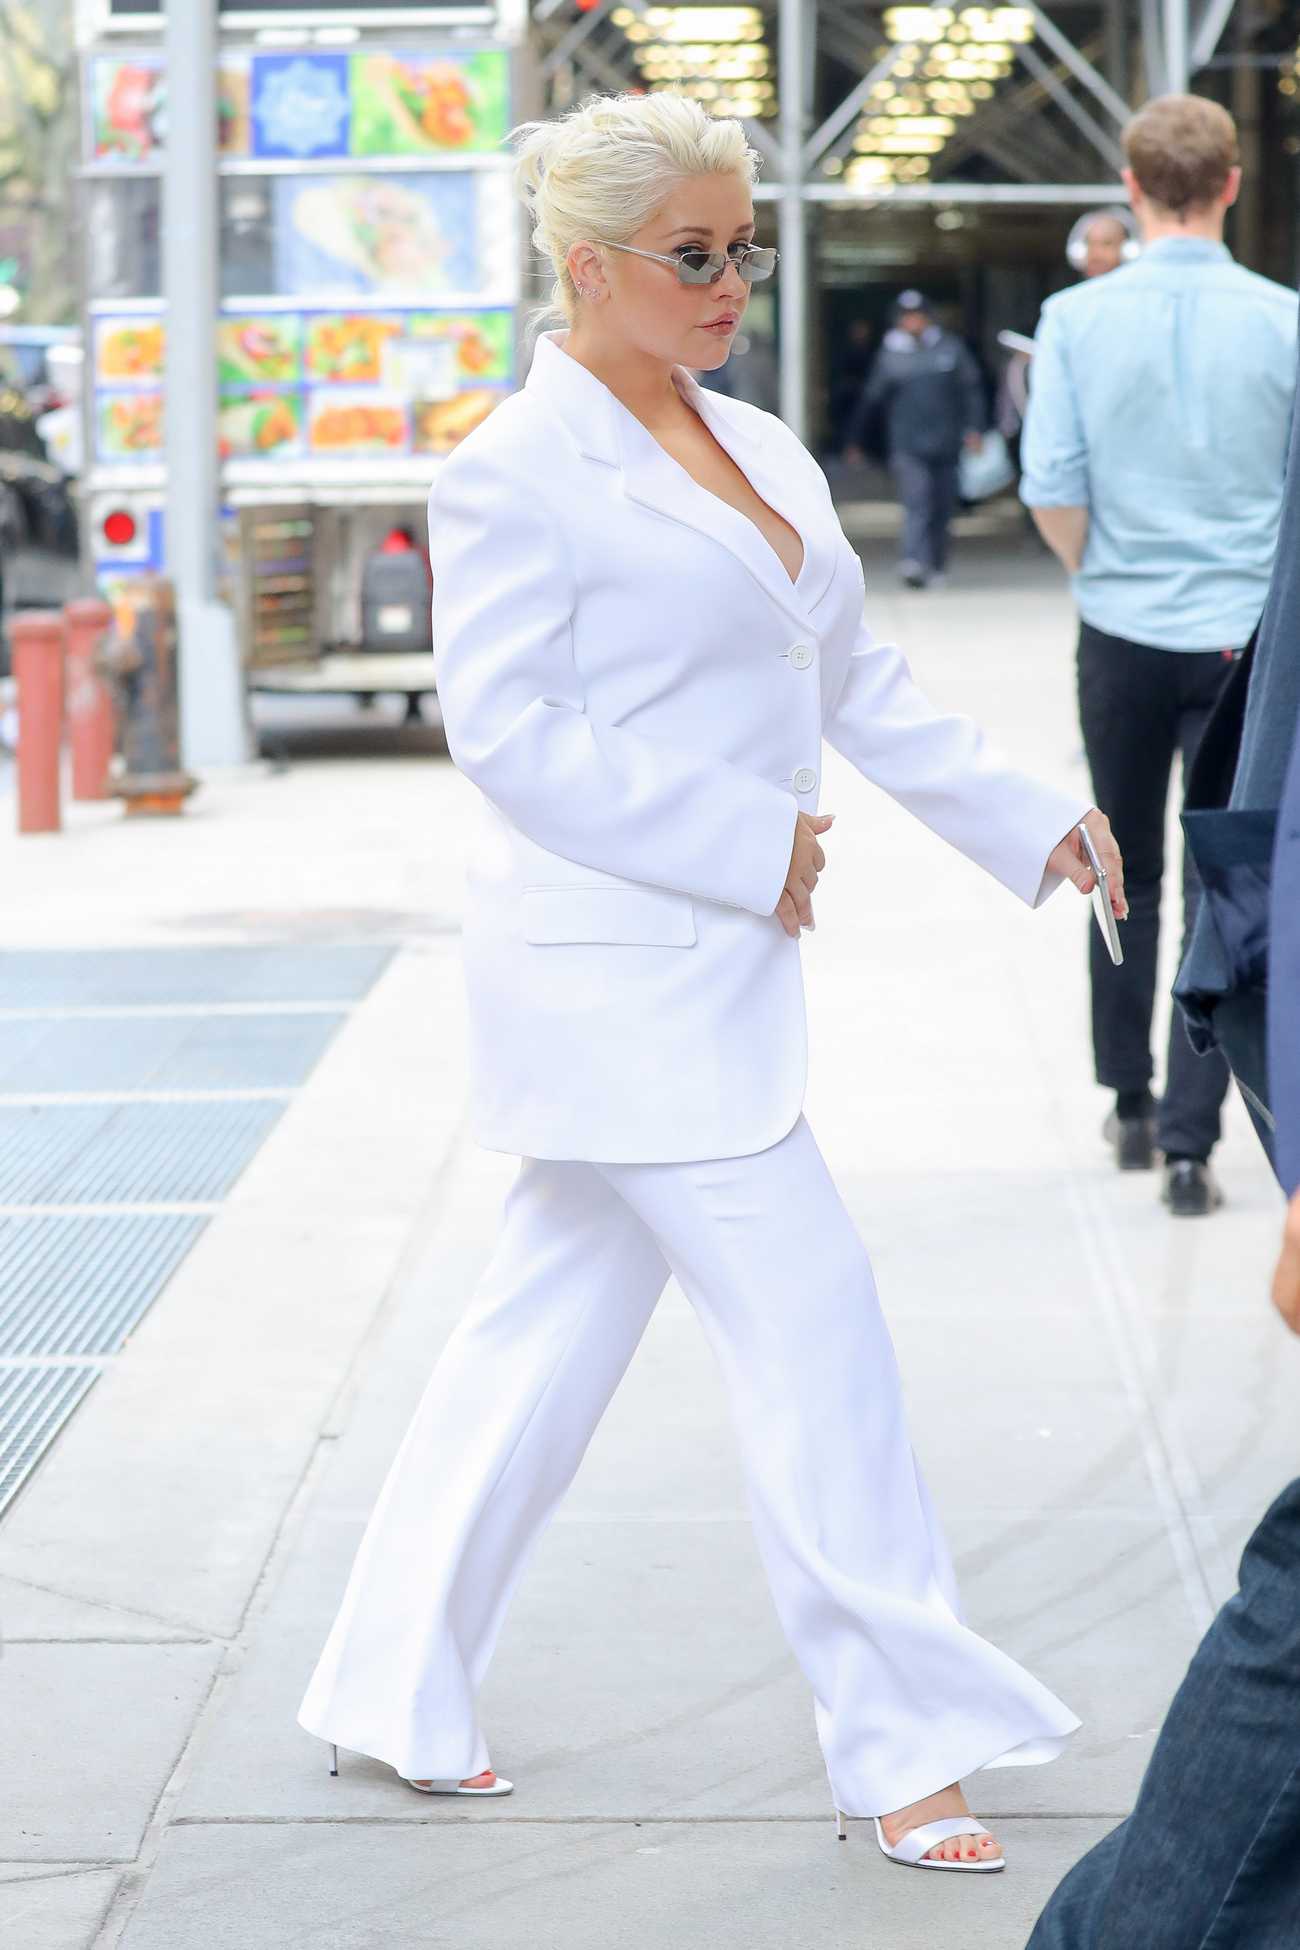 Christina_Aguilera_-_wears_a_white_suit_while_out_and_about_in_New_York_City_-_May_12C_2018-01.jpg